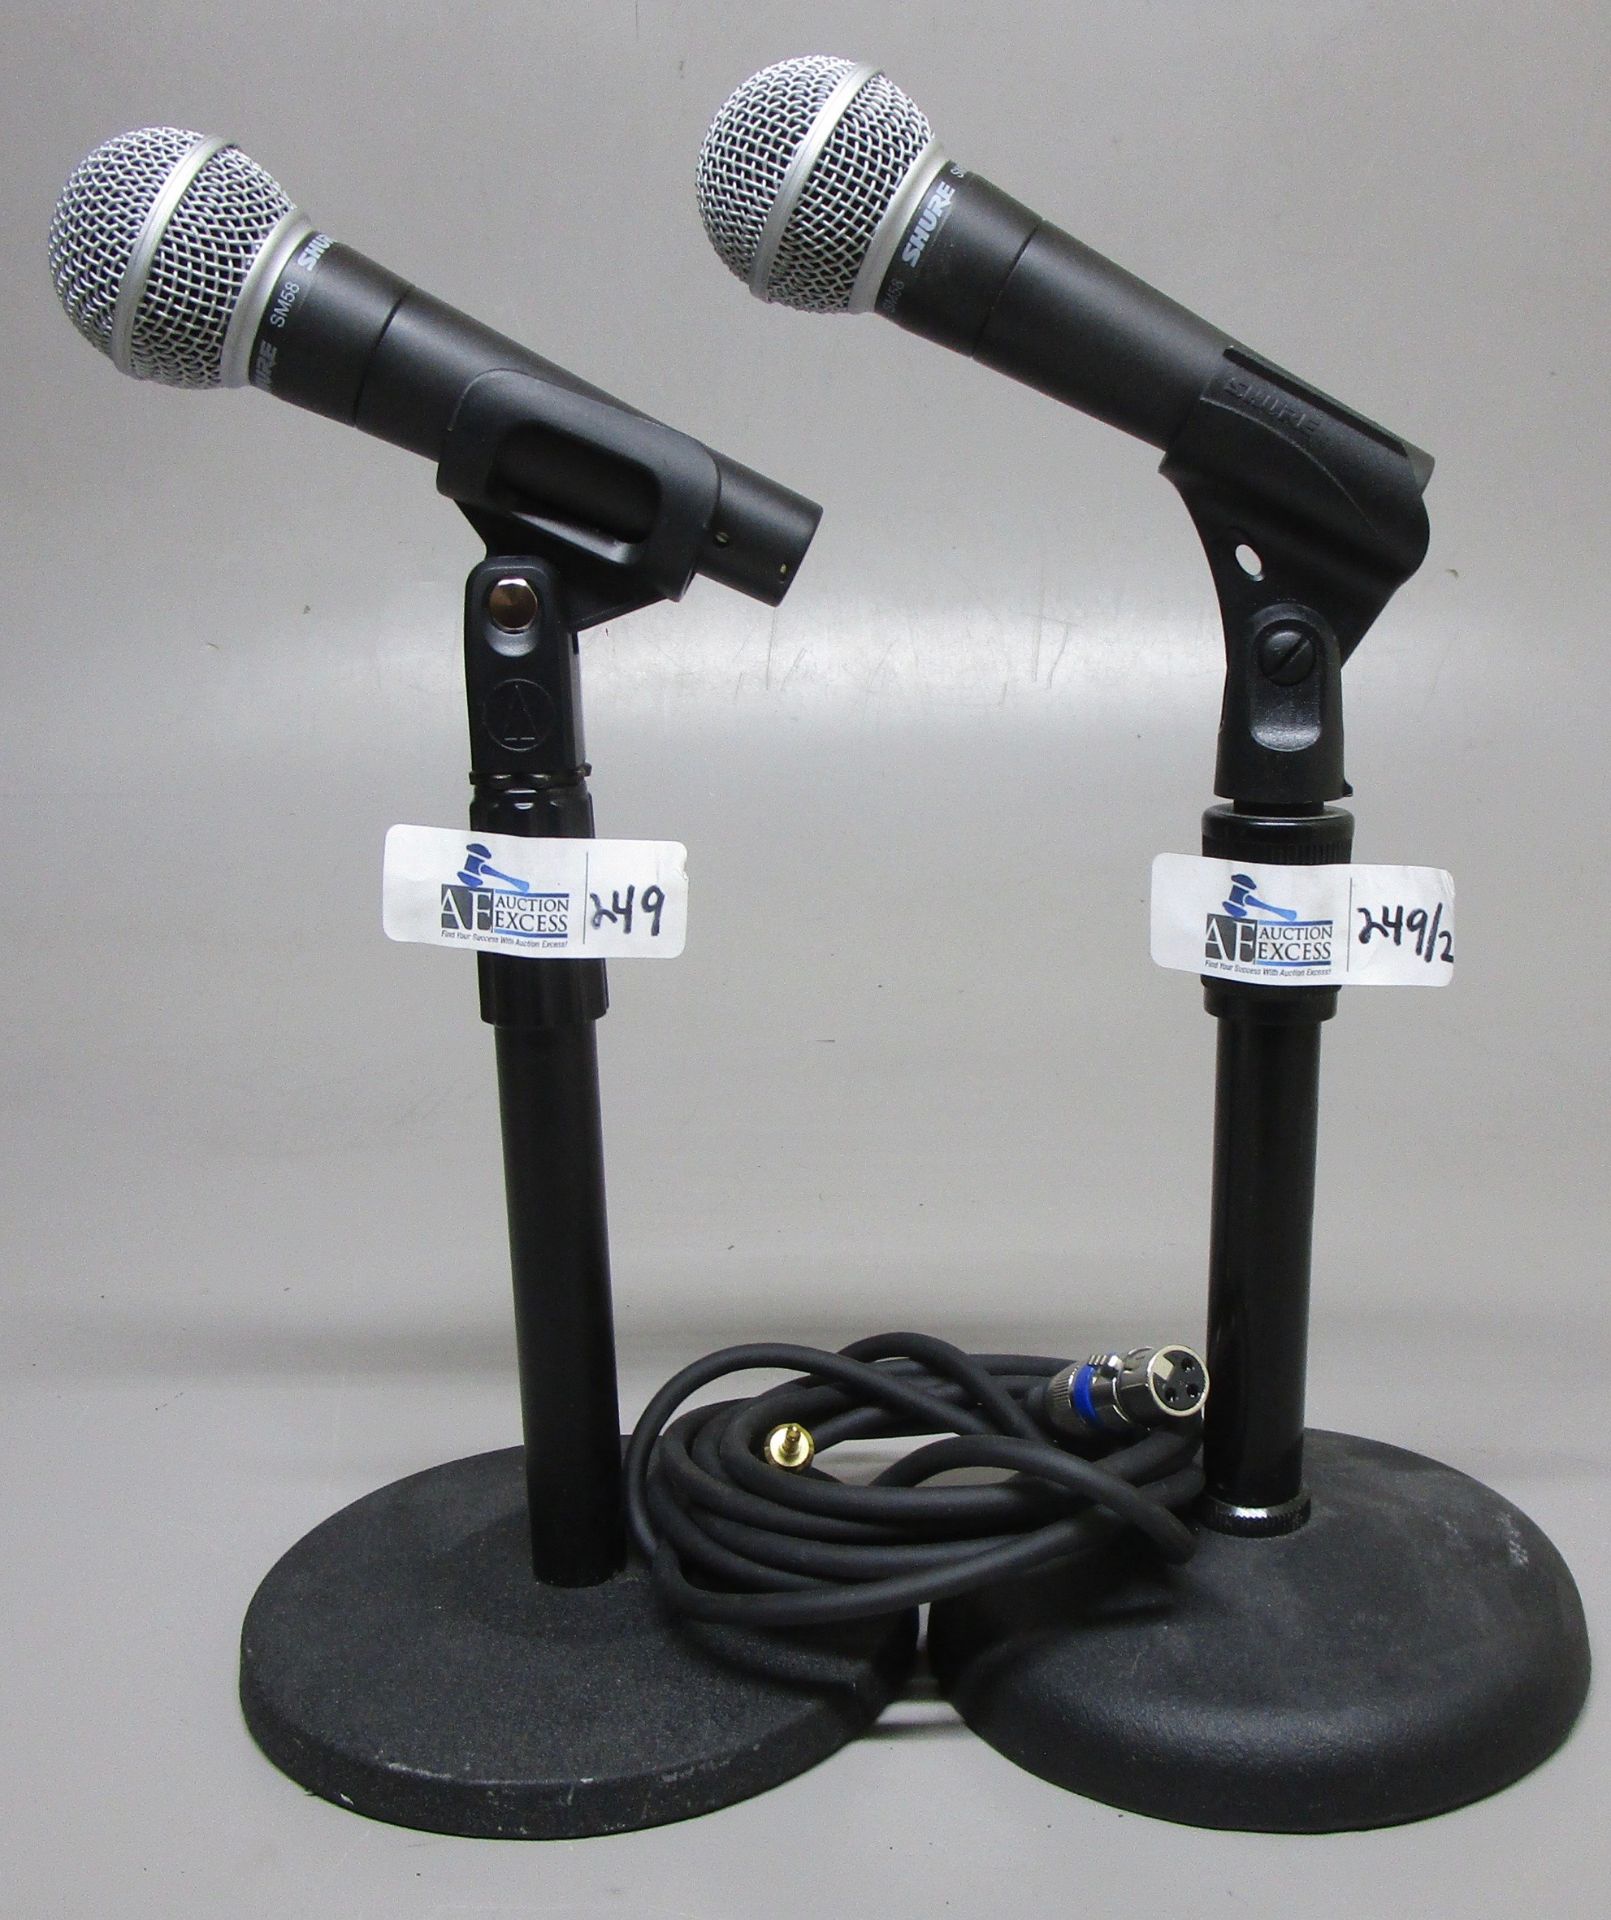 LOT OF 2 SHURE MICS SM58 WITH DESKTOP STANDS - Image 2 of 3